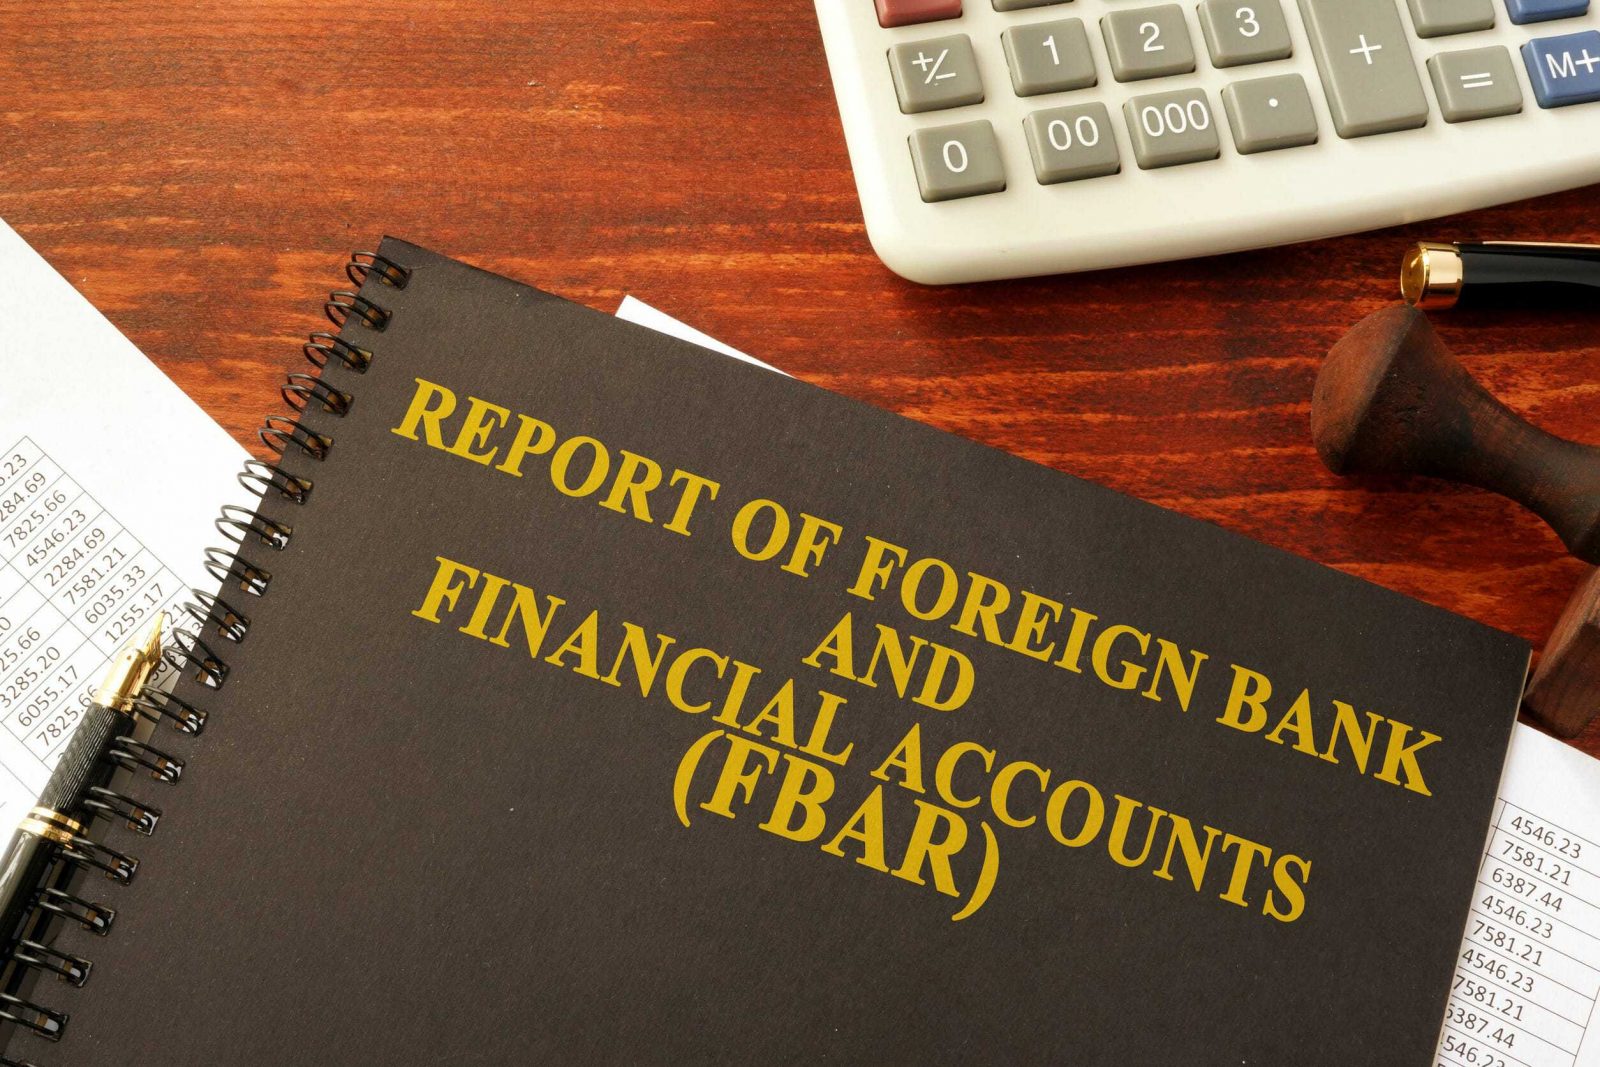 Have a Foreign Bank Account? You May Be Required to File an FBAR